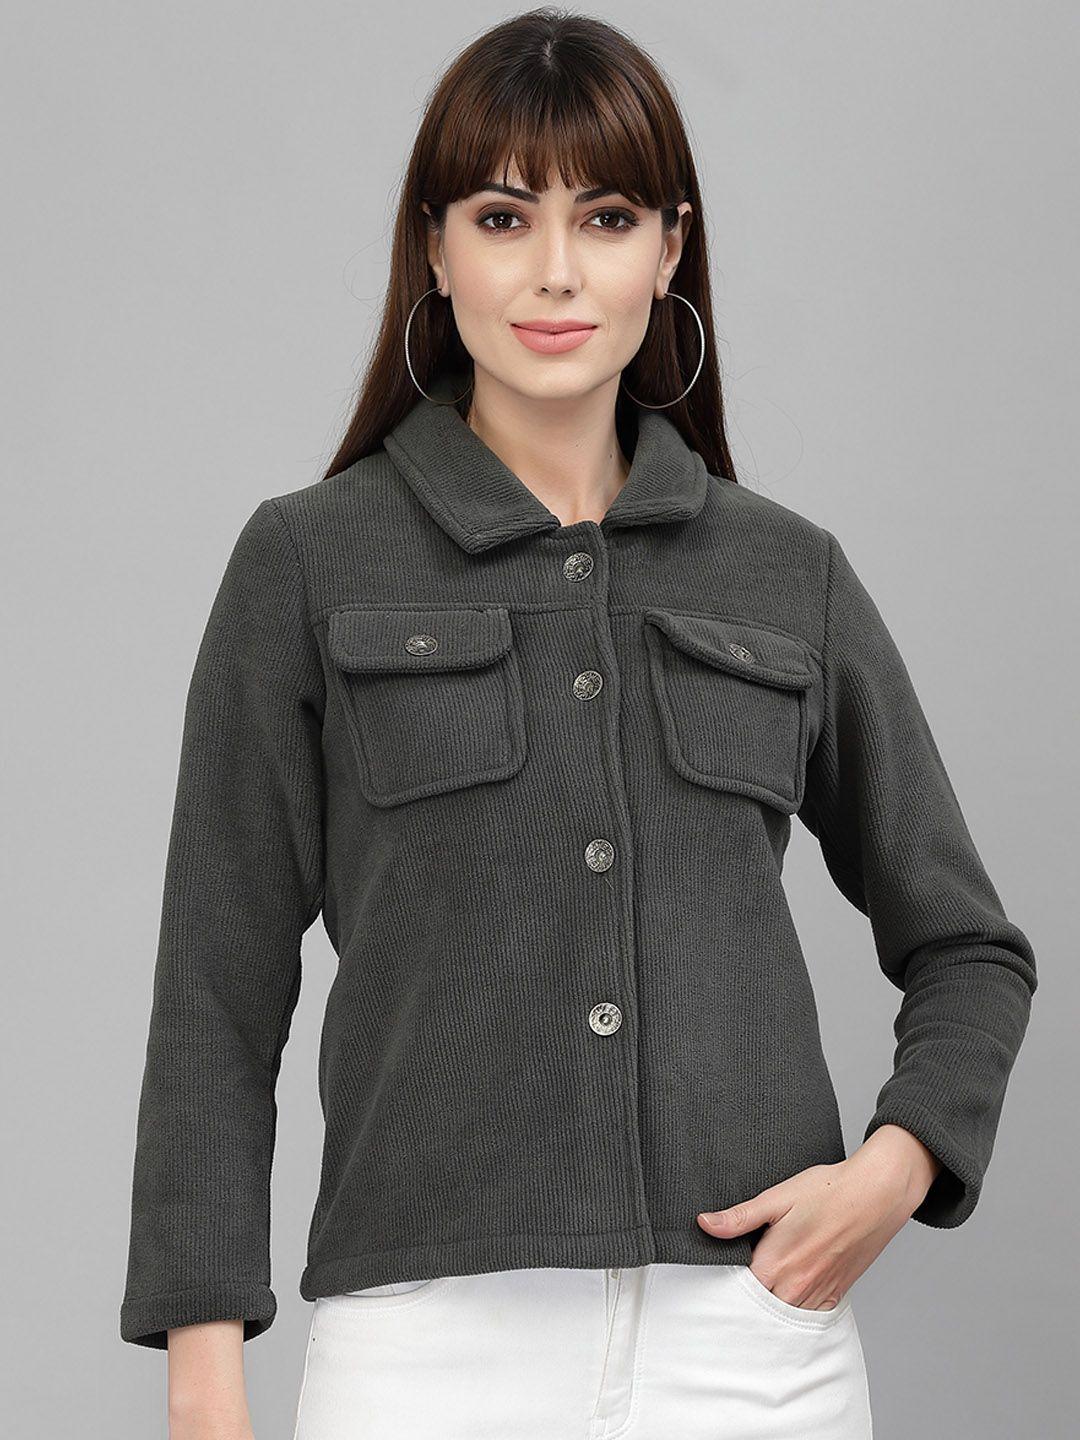 broowl women olive green corduroy tailored jacket